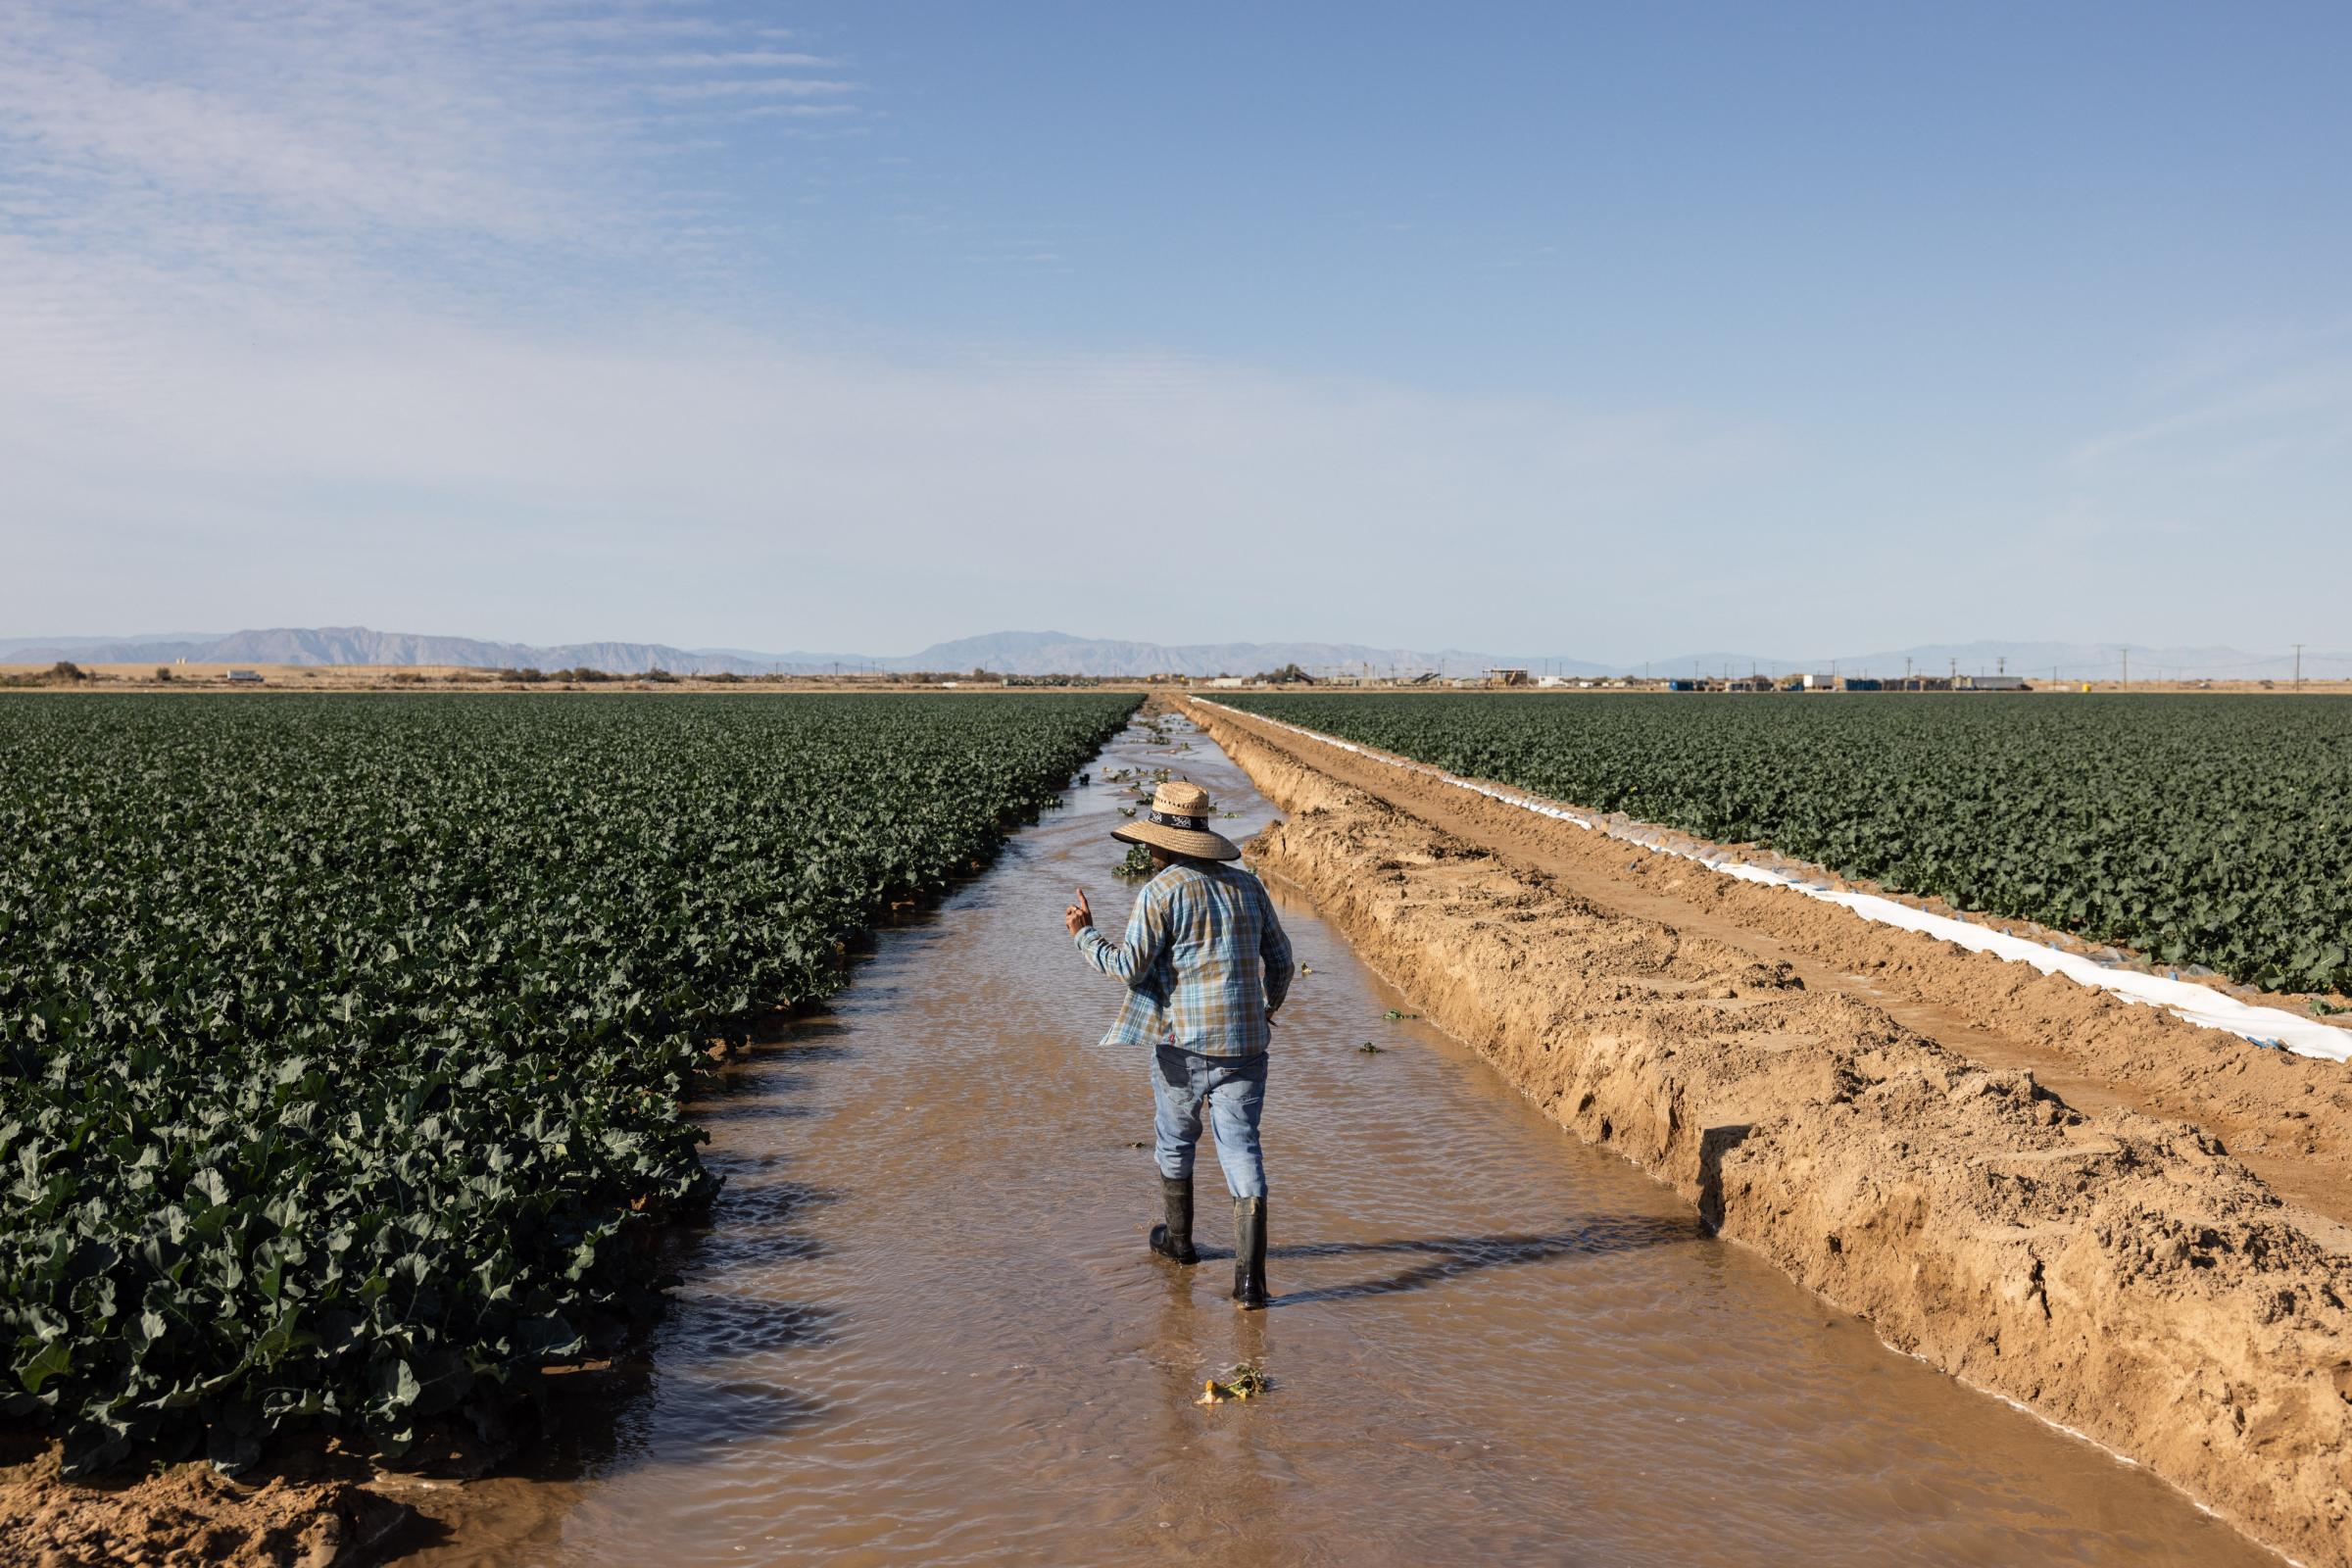  - The Salton Sea faces a crisis  - A farm worker is checking on an irrigation system...